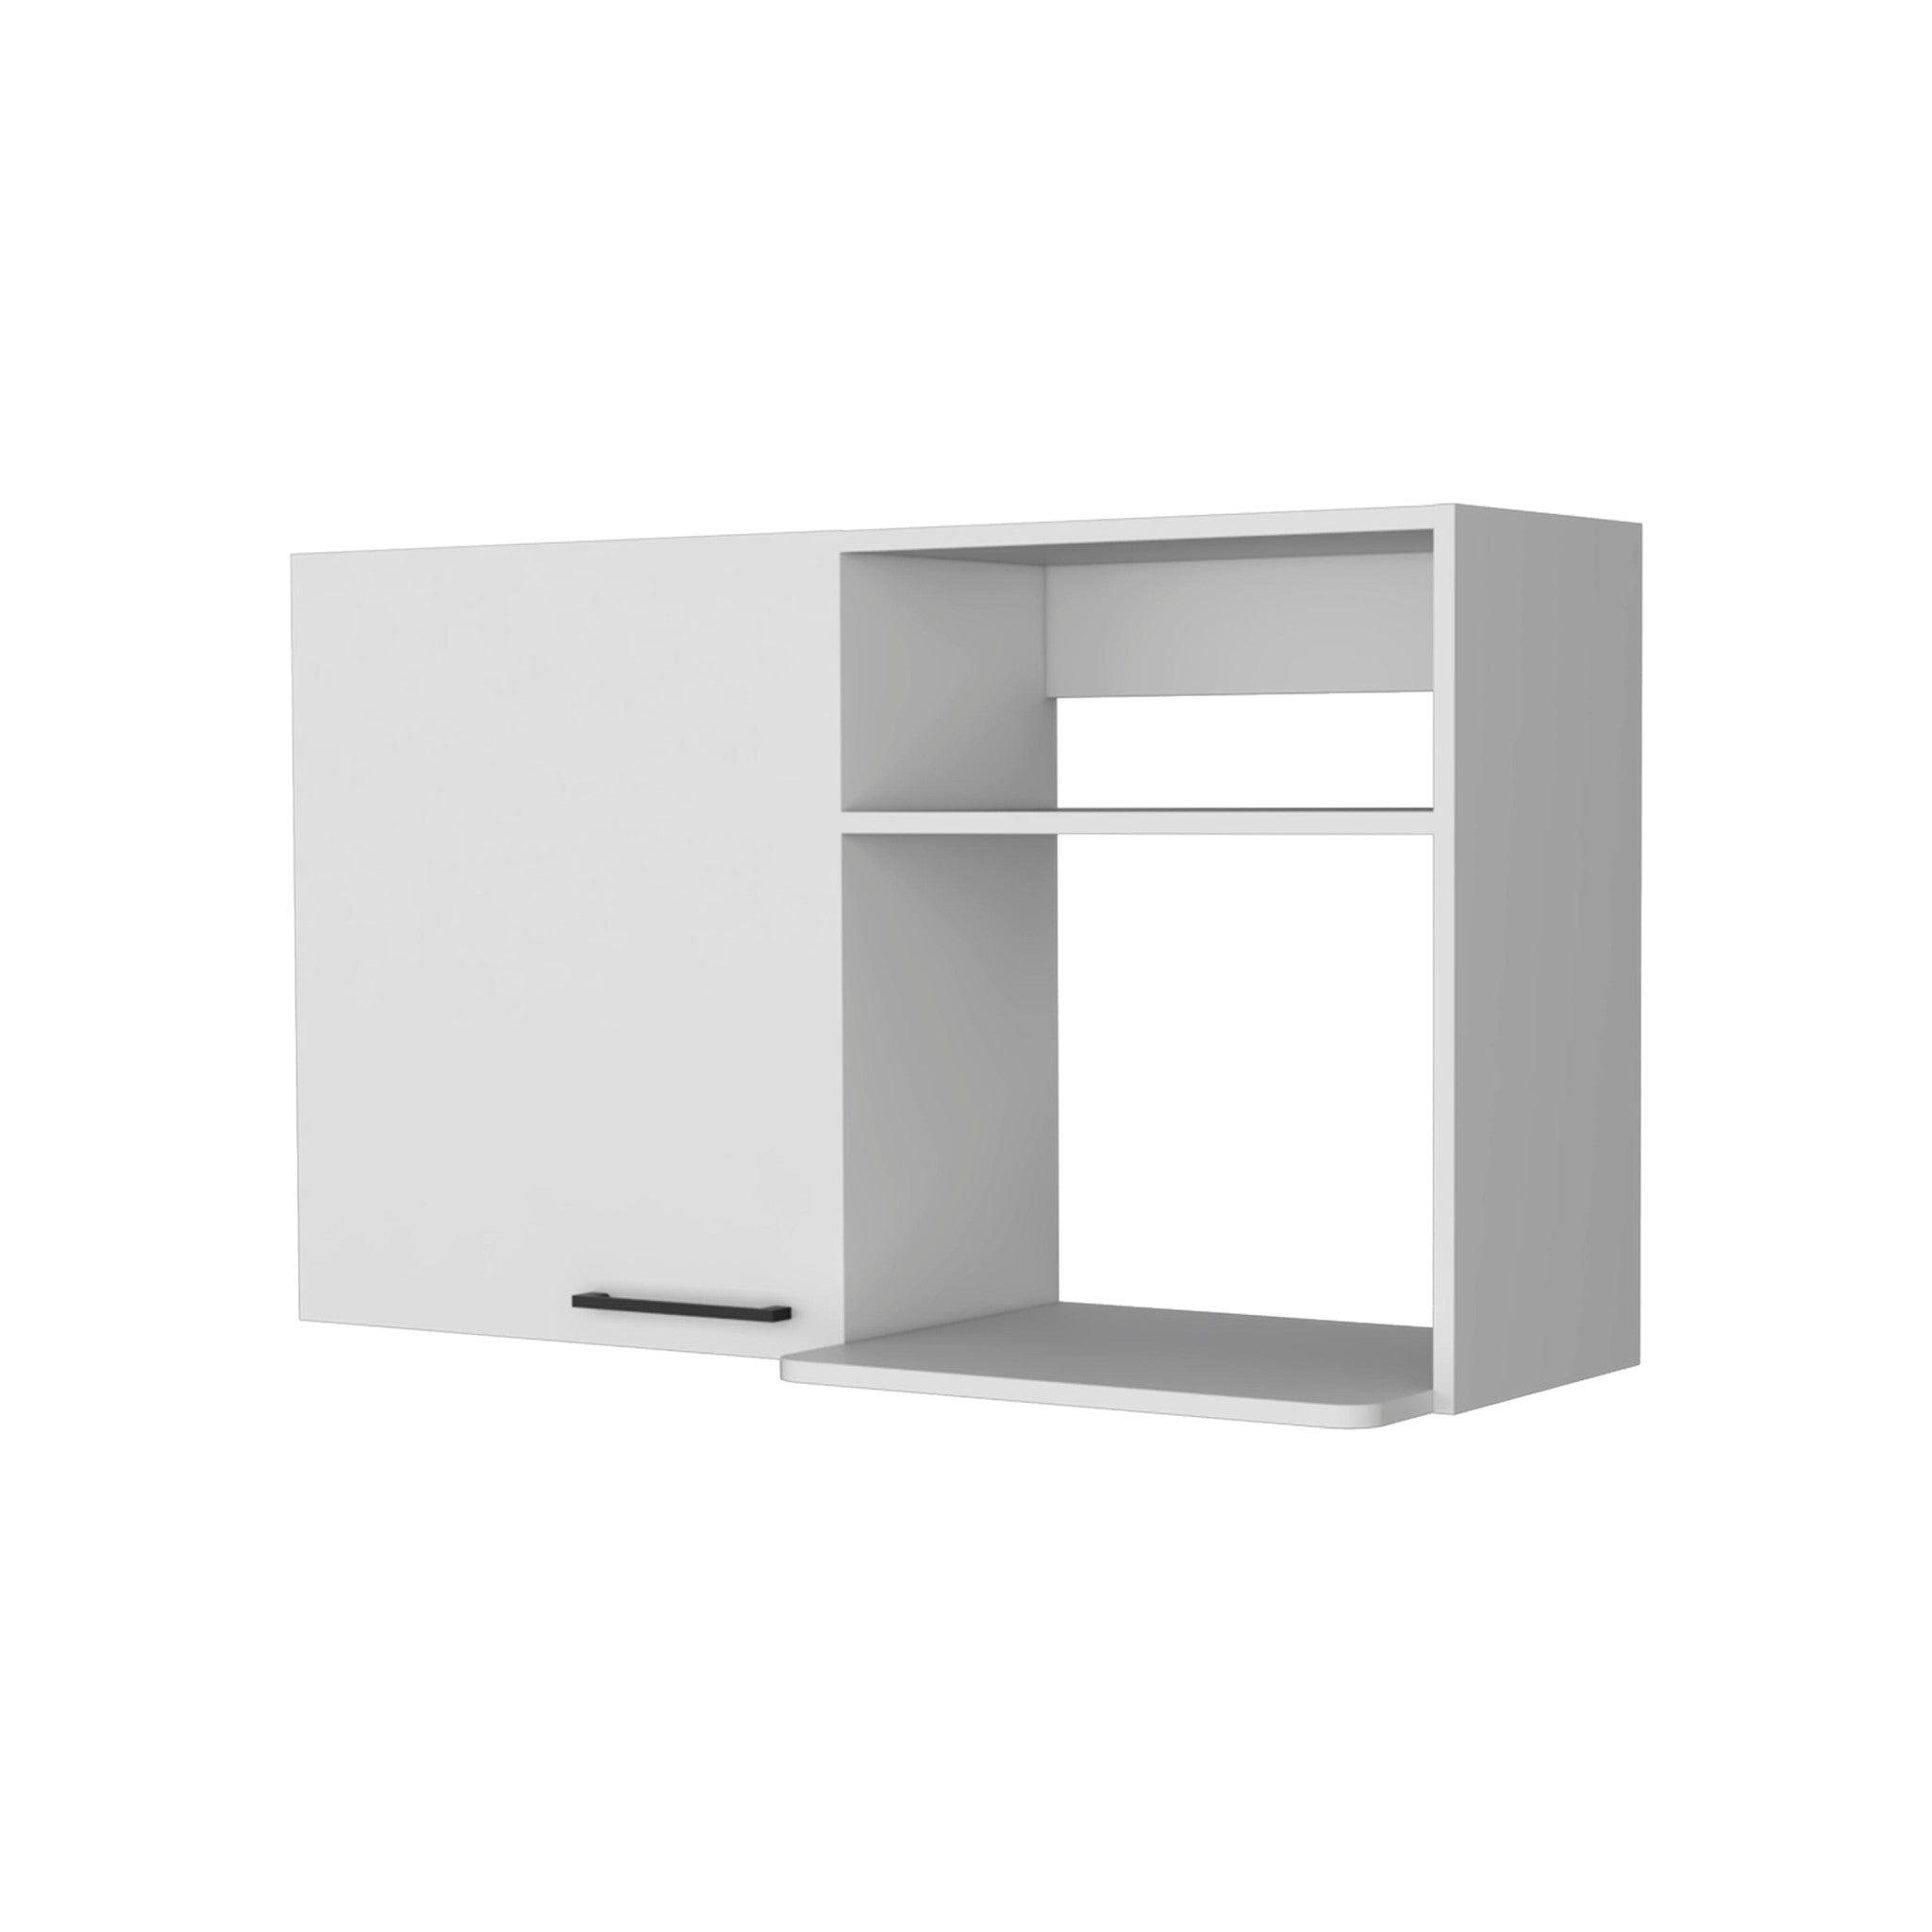 39" White Accent Cabinet With Two Shelves